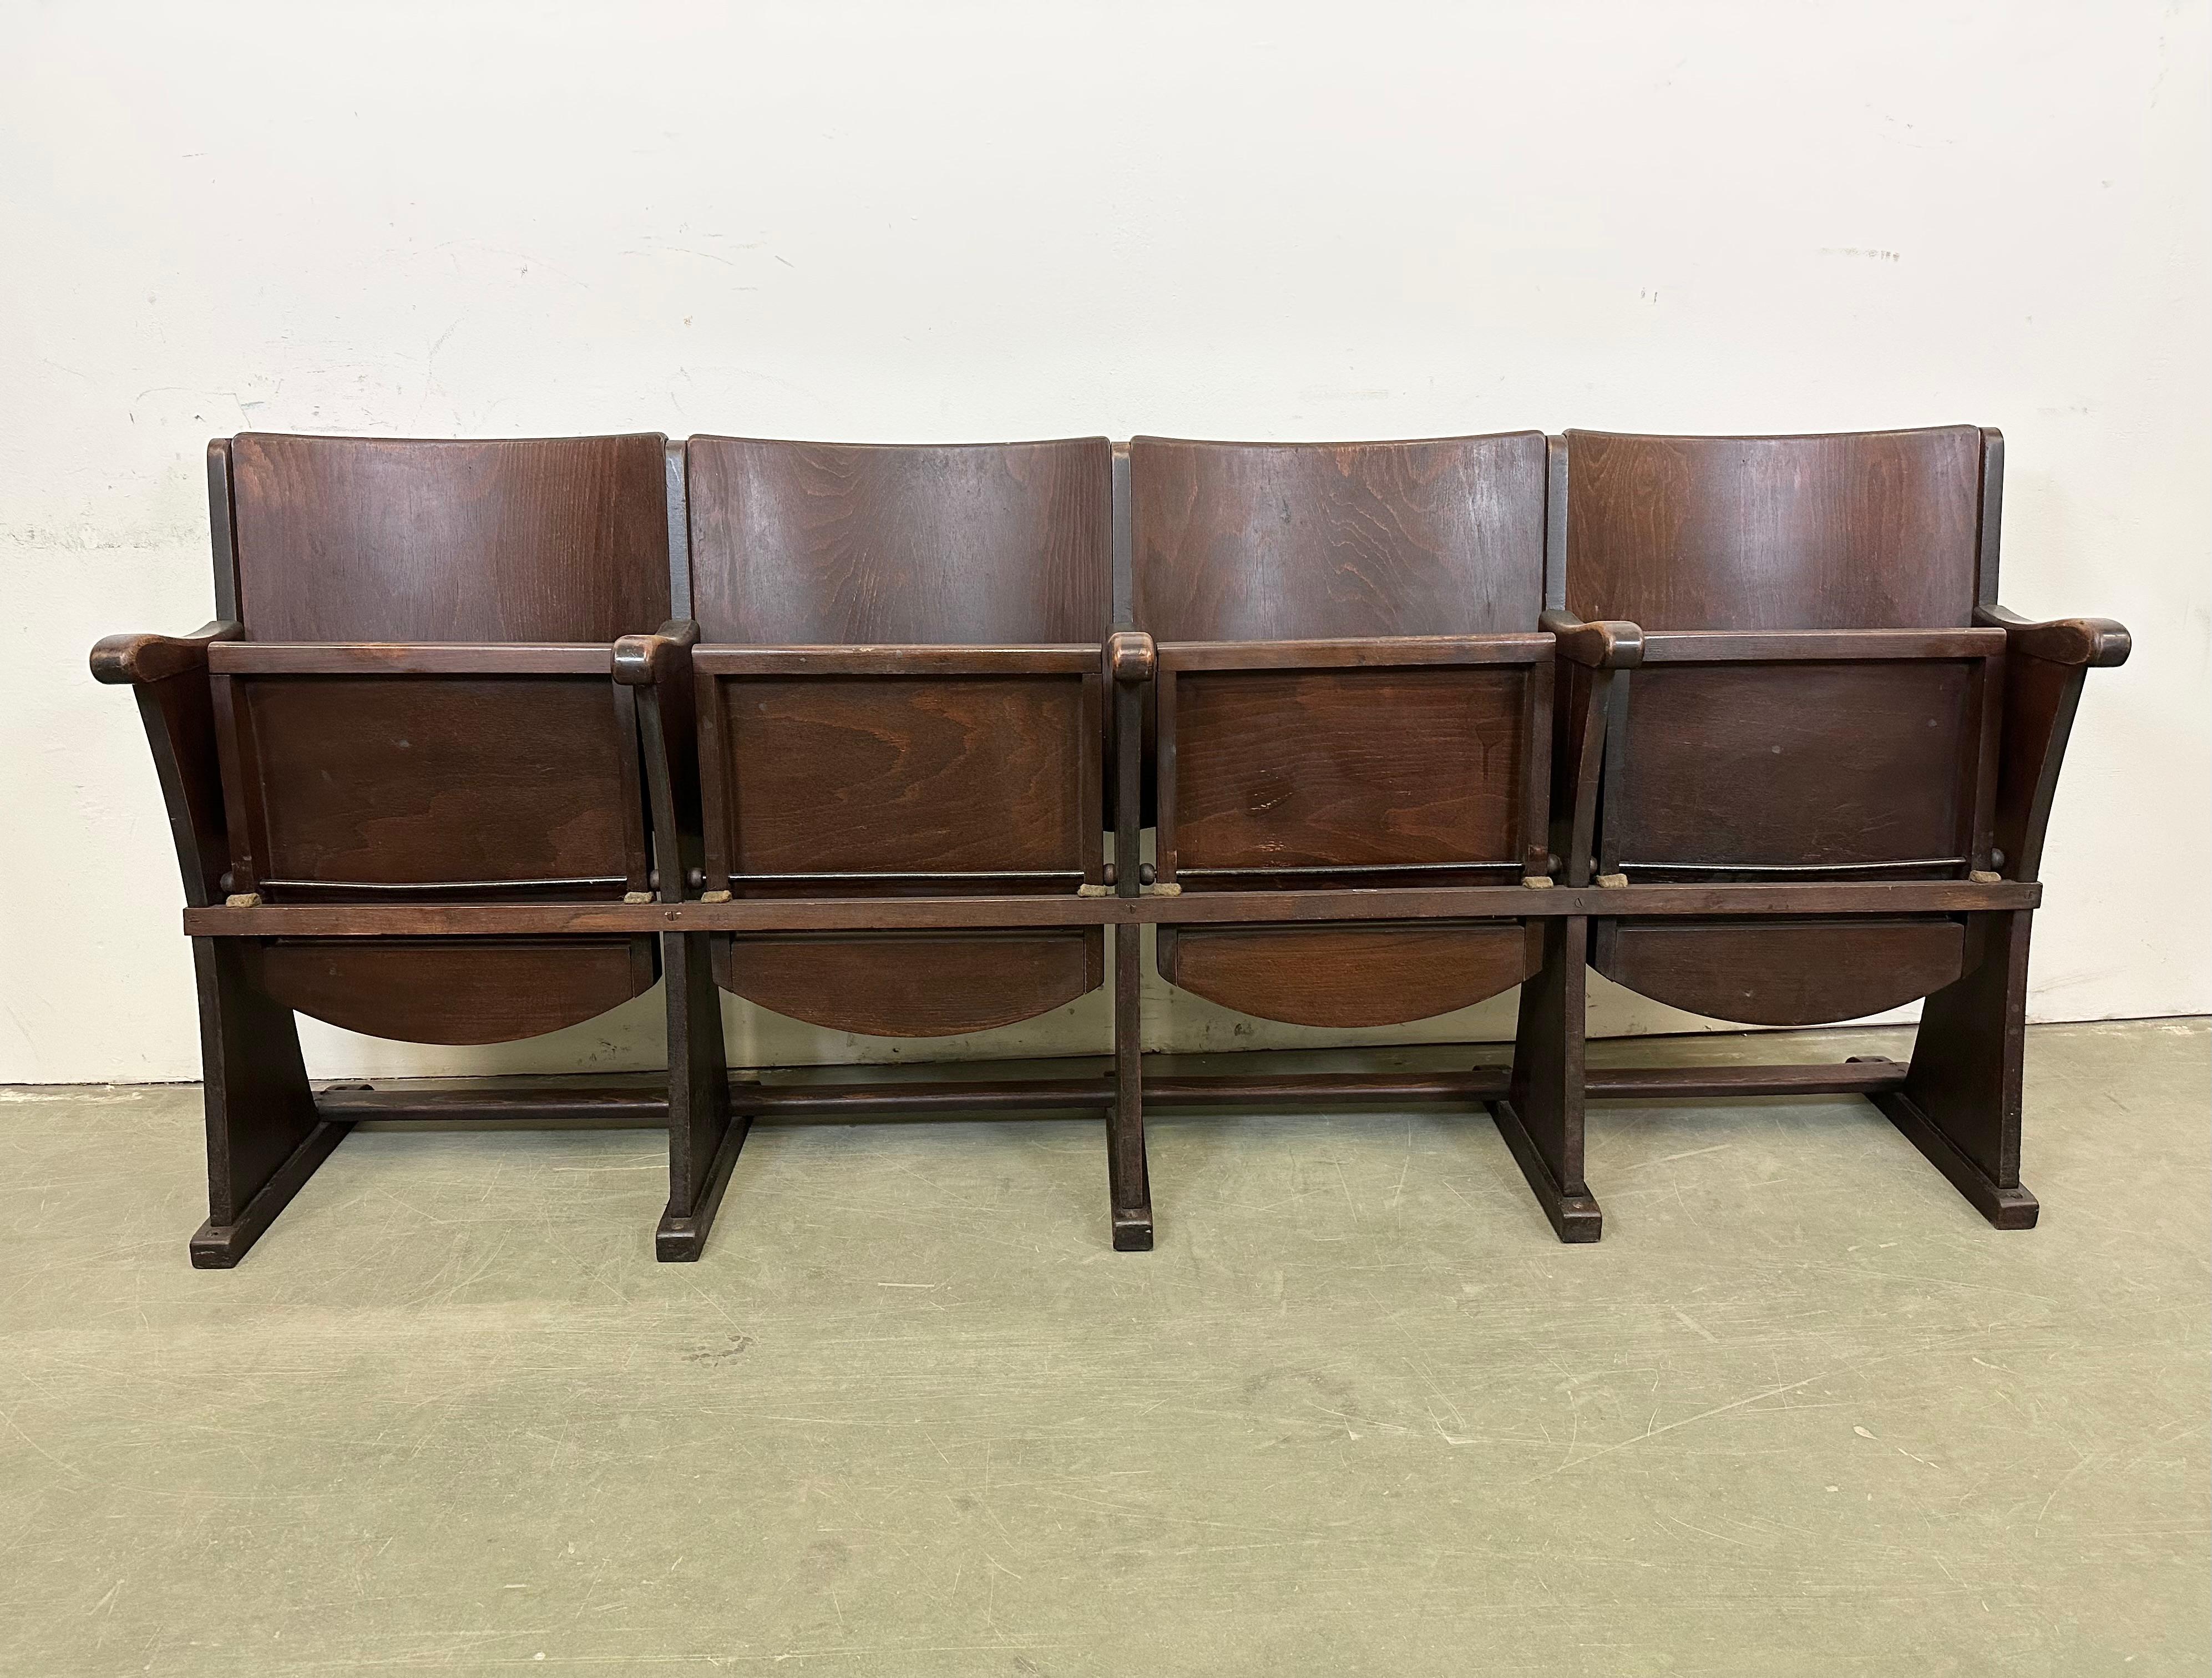 This four-seat cinema bench was produced by Thonet in former Czechoslovakia during the 1930s-1950s. The chairs are stable and can be placed anywhere. It is completely made of wood (partly solid wood, partly plywood). The seats fold upwards. The